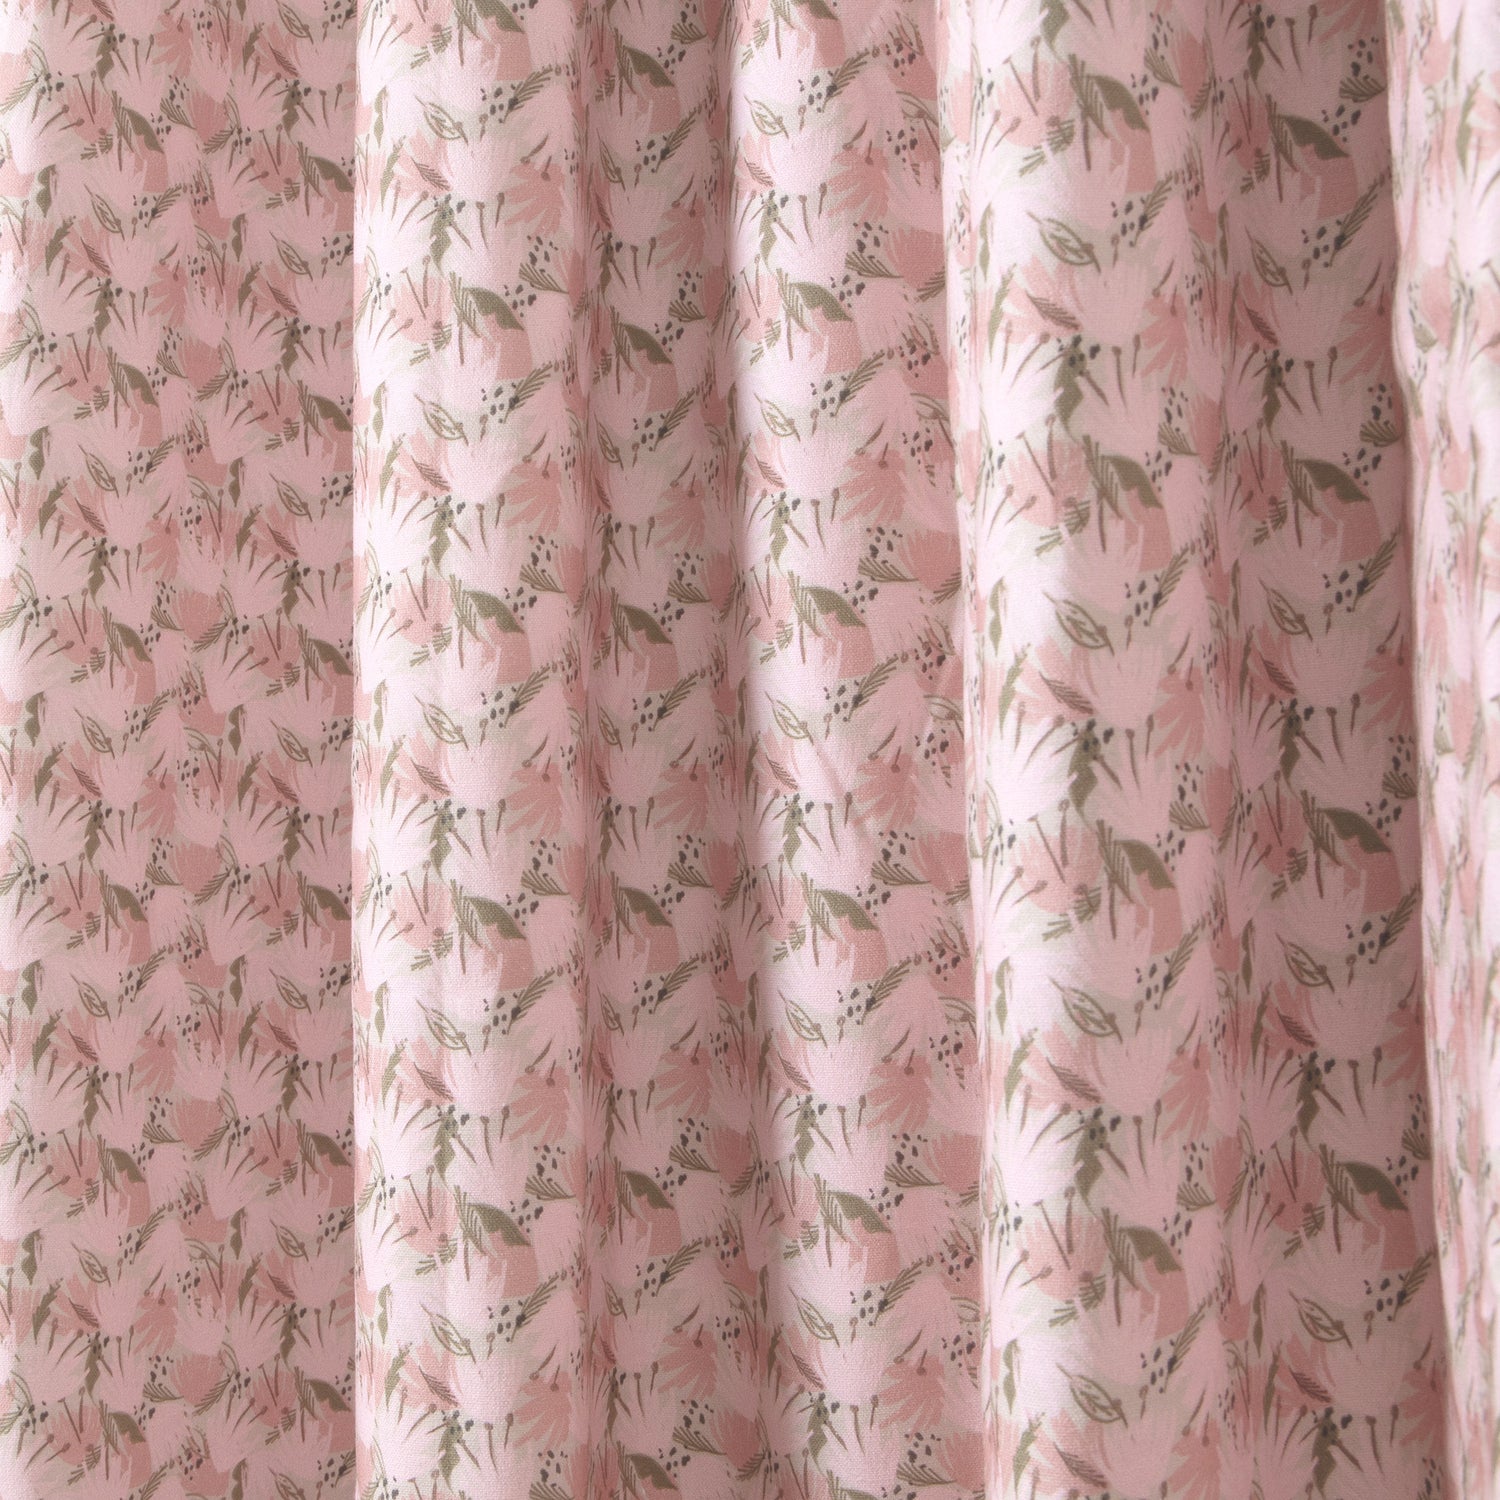 Pink Floral Printed Curtain Close-Up 